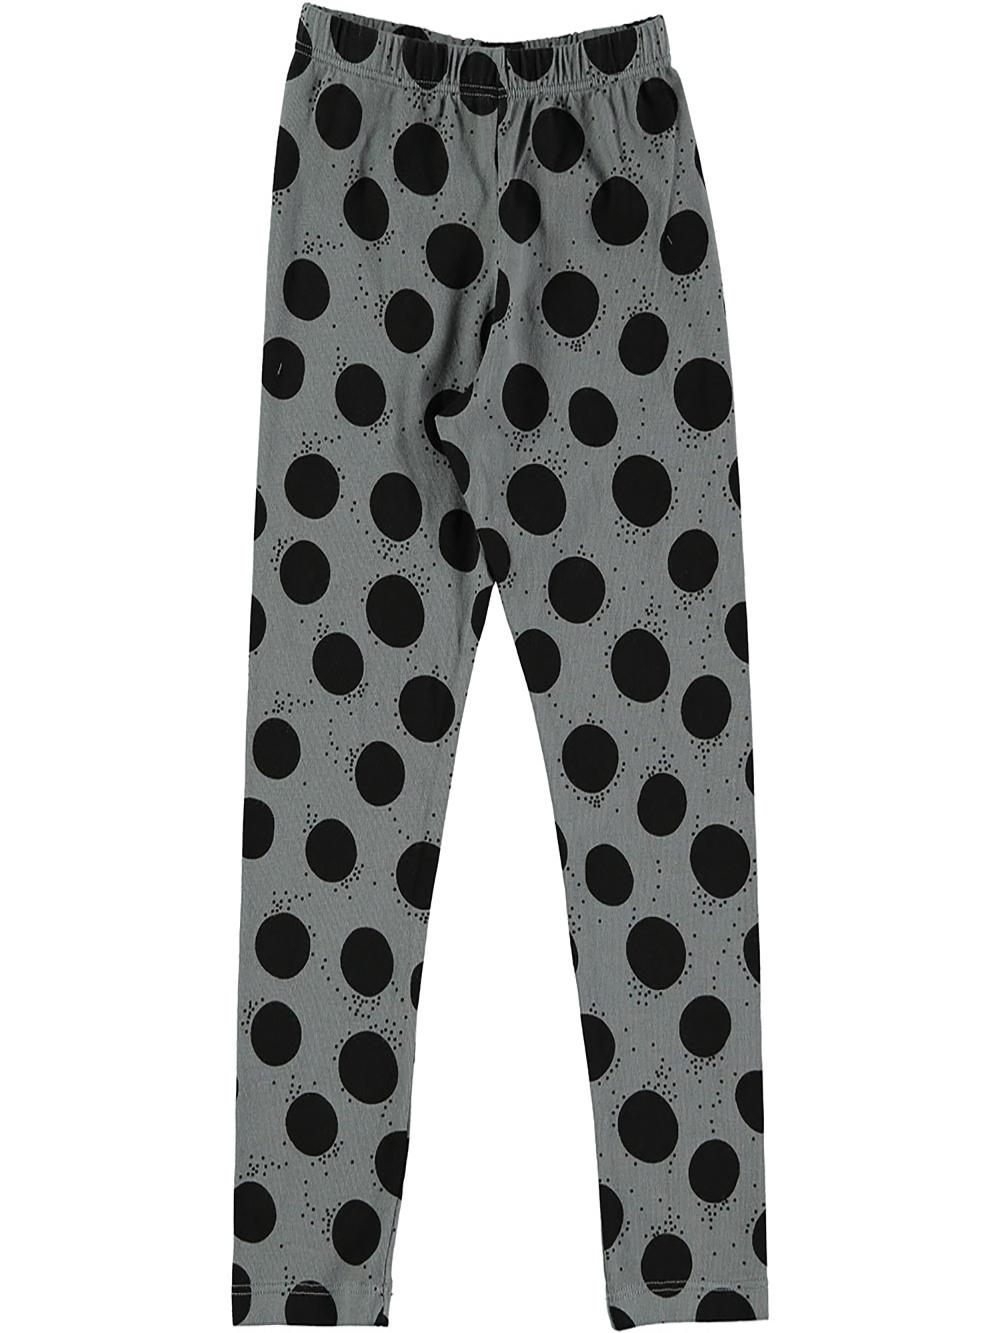 GRAY LEGGINGS WITH DOTS PRINT